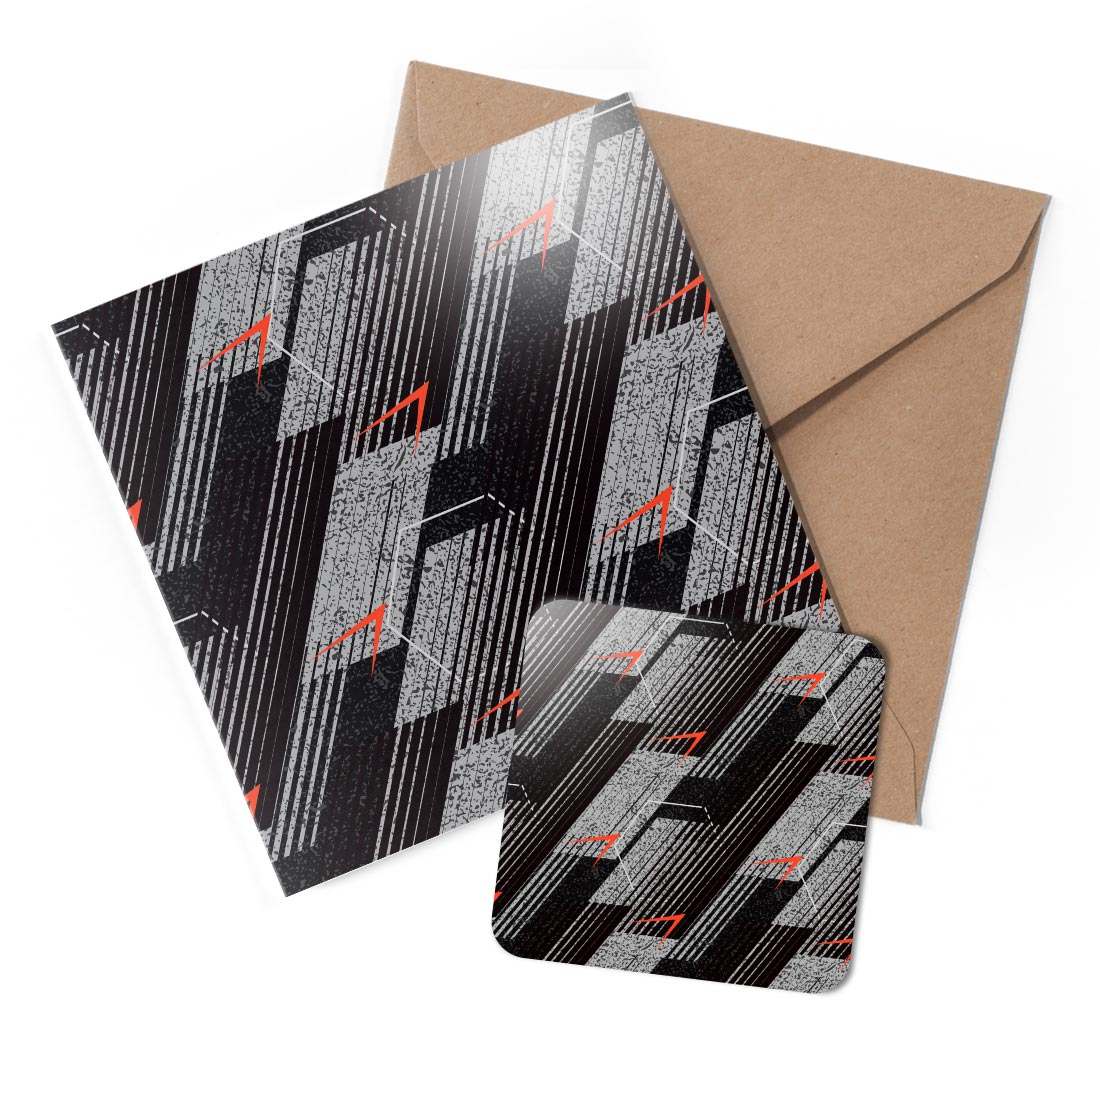 1 x Greeting Card & Coaster Set - Abstract Black & Red Tech Pattern #50019